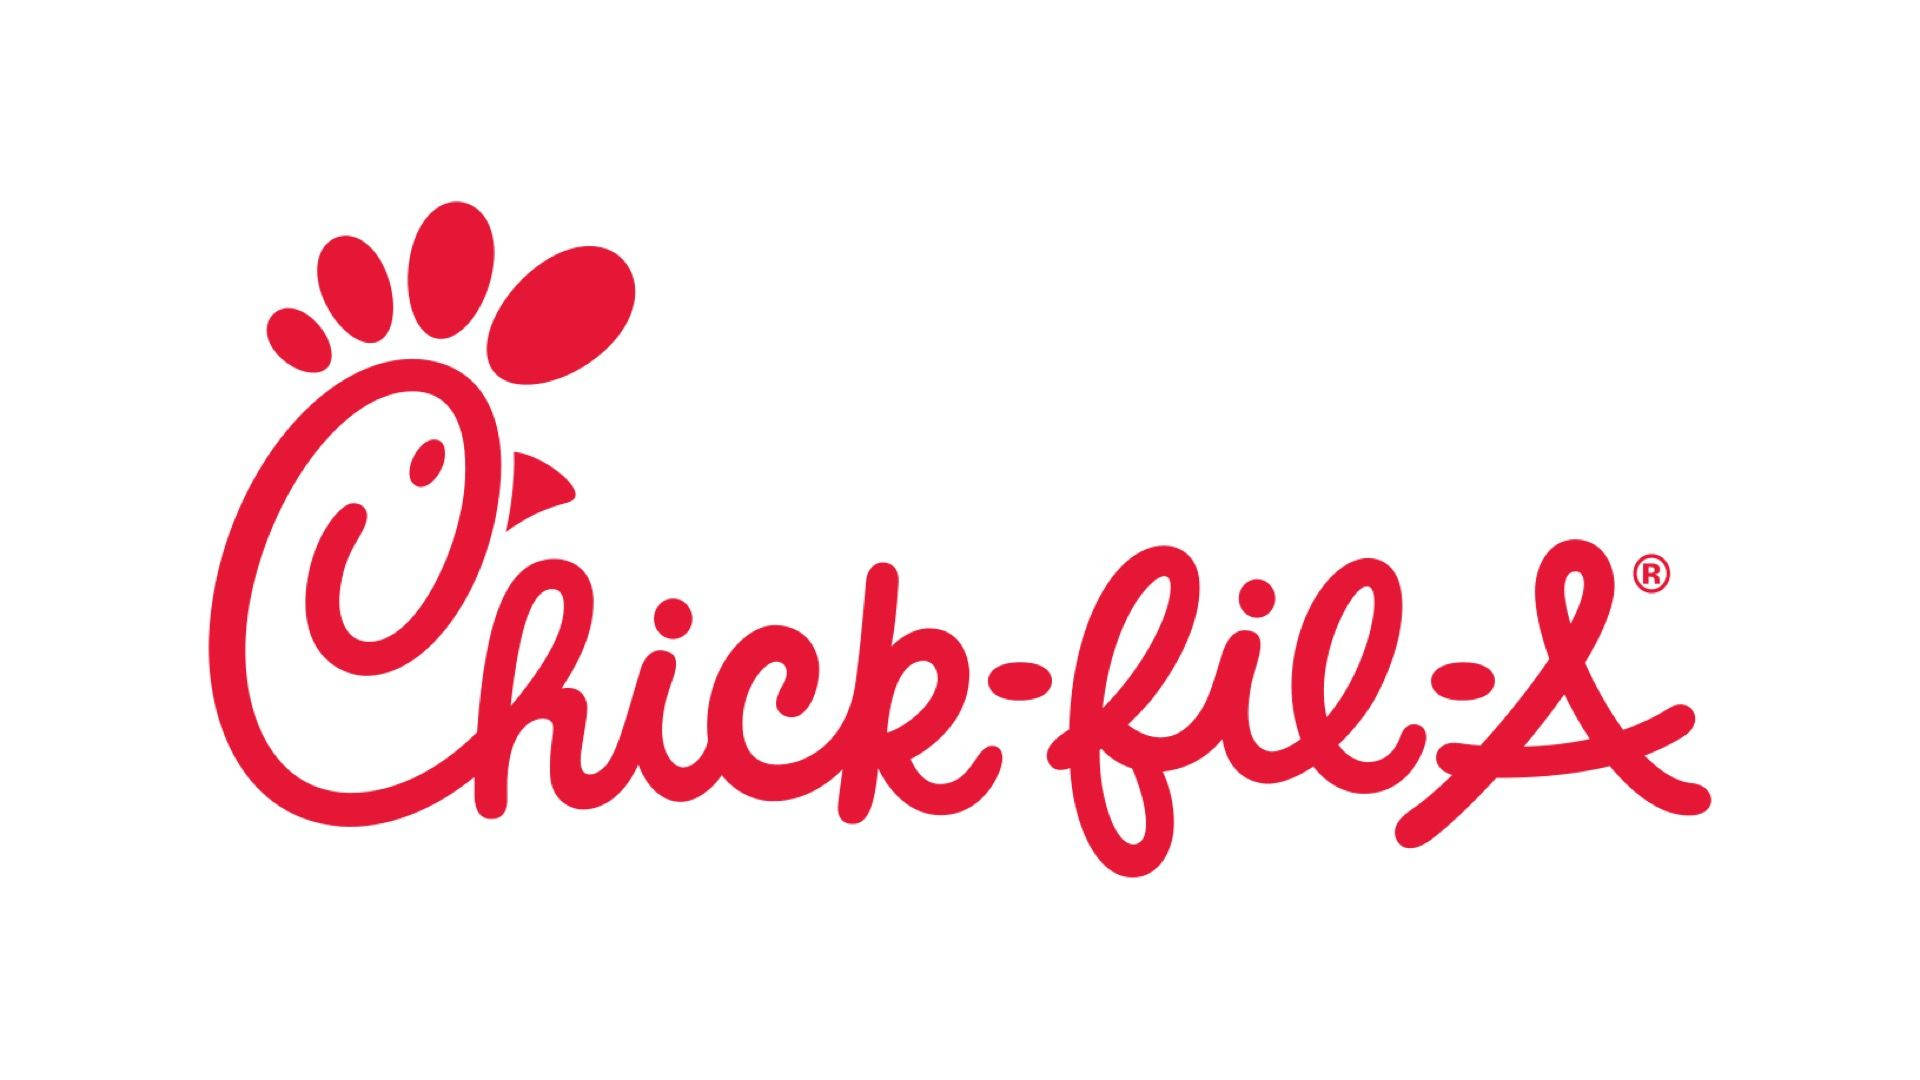 The Iconic Chick-fil-a Logo Background